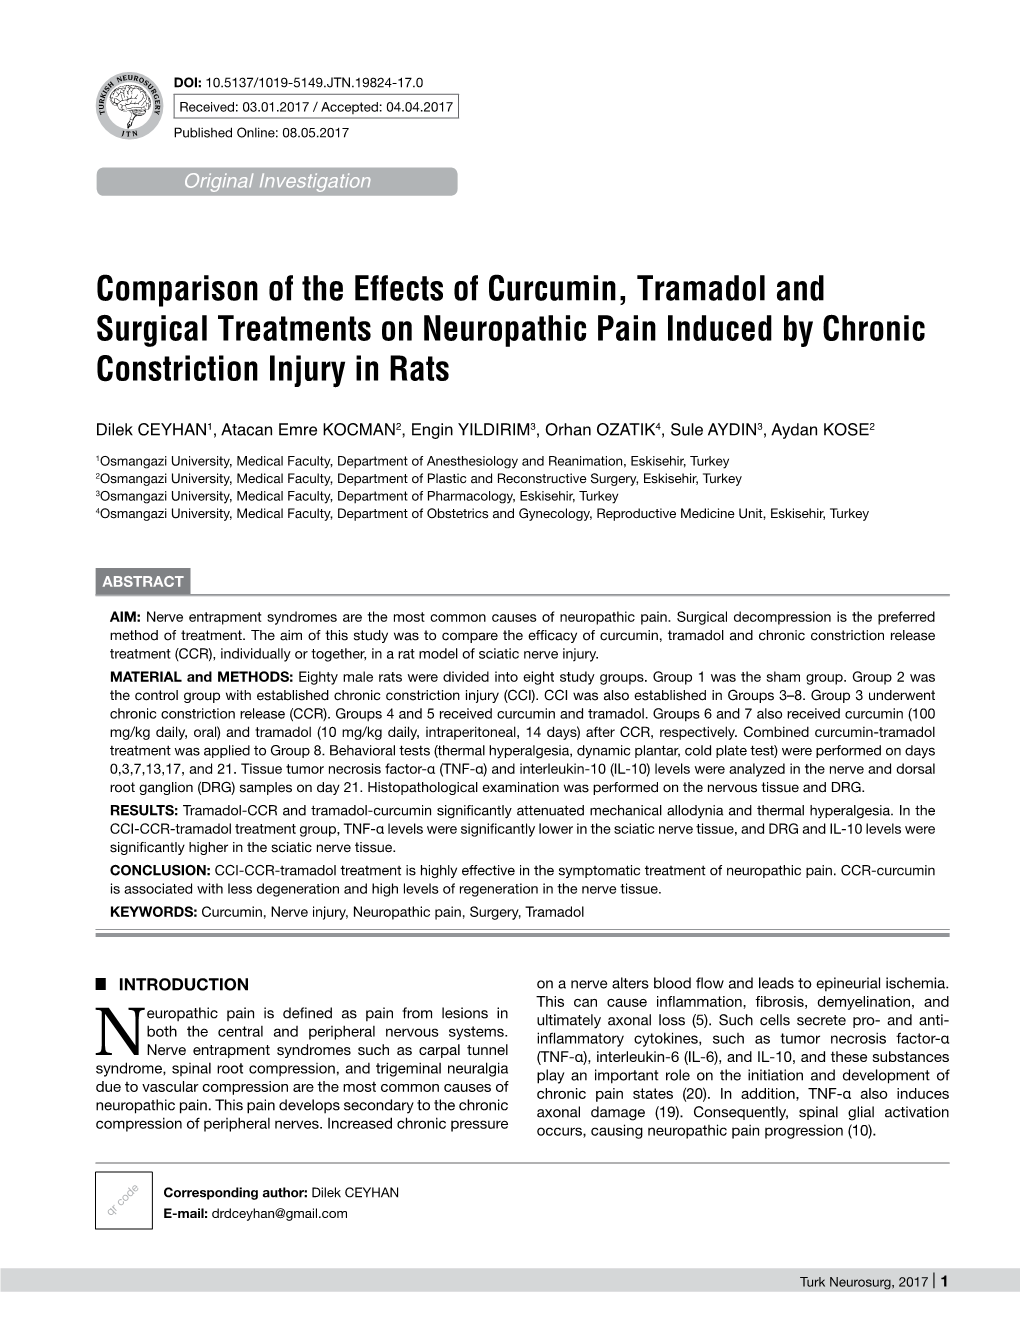 Comparison of the Effects of Curcumin, Tramadol and Surgical Treatments on Neuropathic Pain Induced by Chronic Constriction Injury in Rats